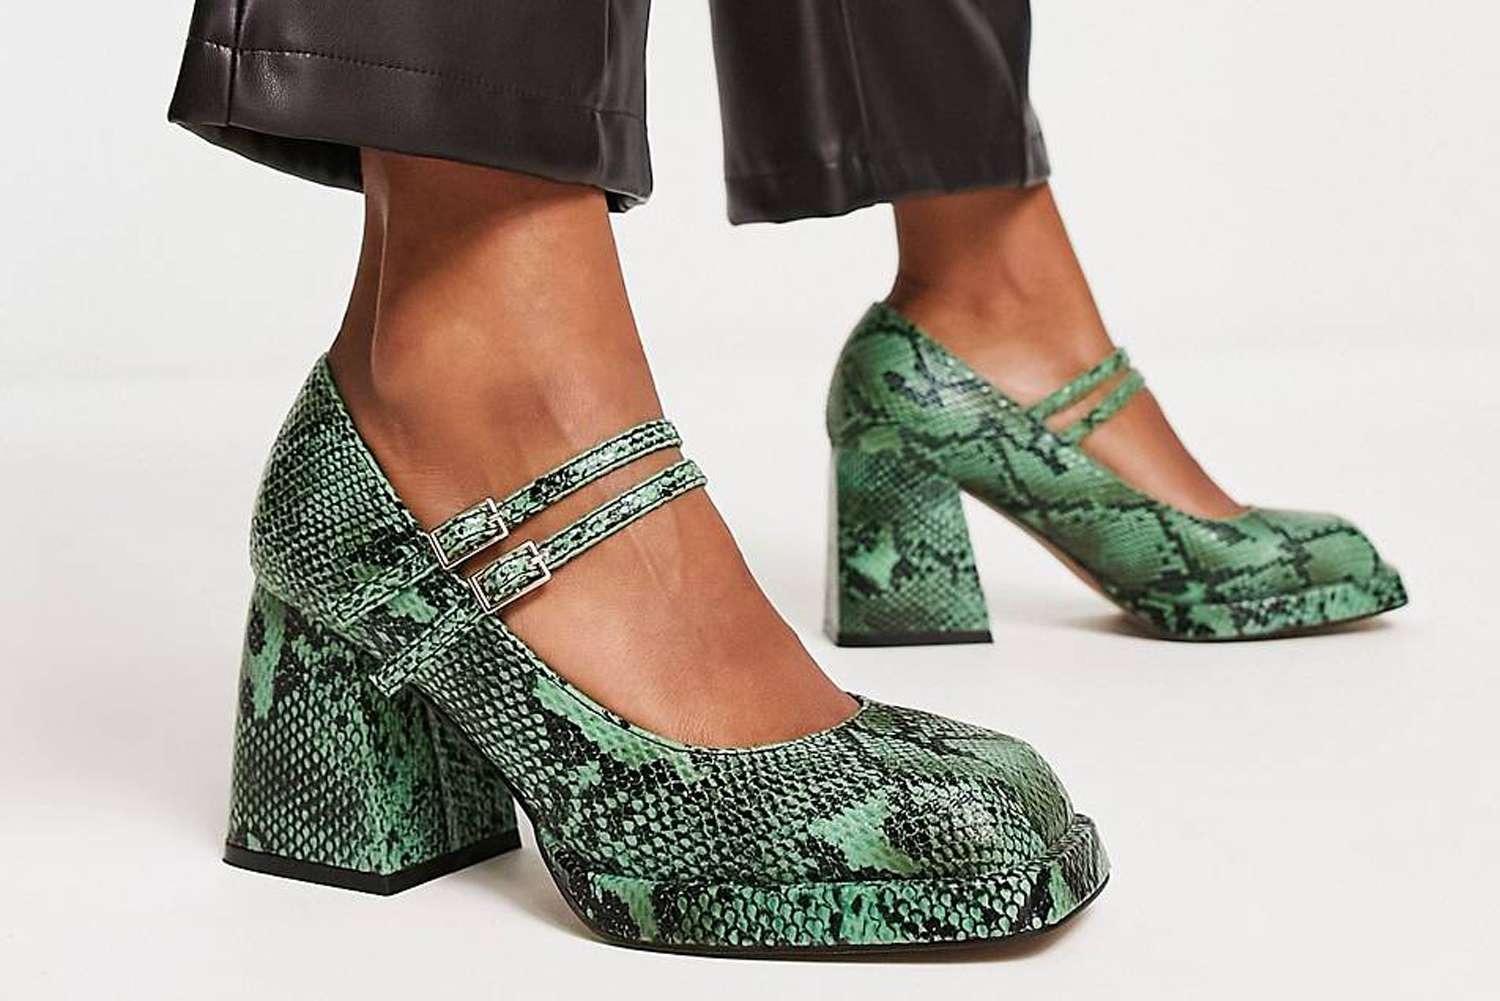 ASOS Design Sully Platform Mary Jane Mid Shoes in Green Snake